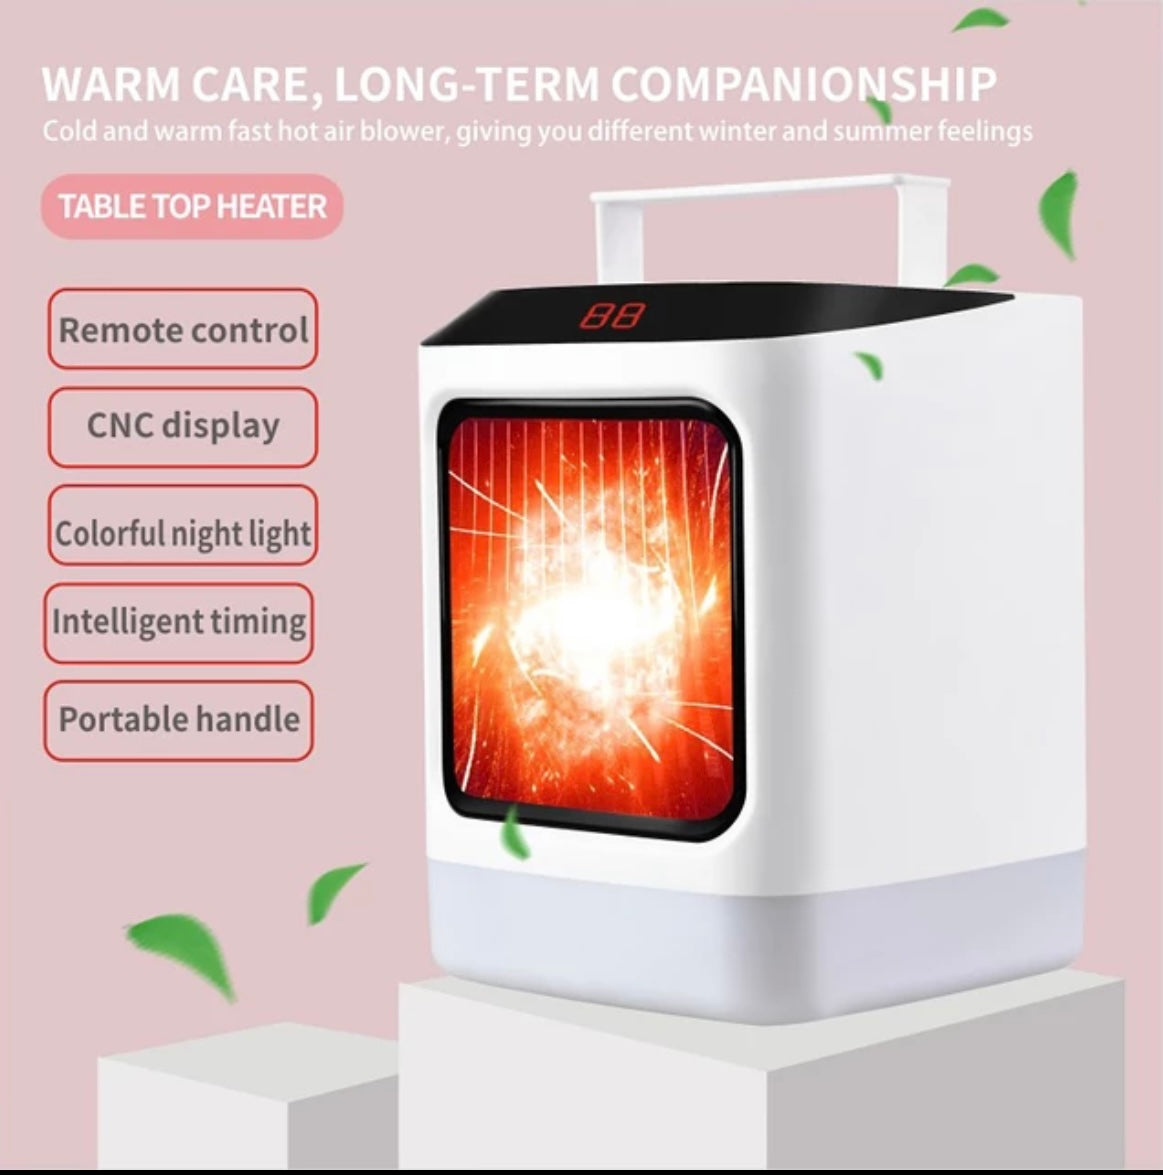 Relaxin Products Premium Portable 2-in-1 Space Heater and Cooler - K&L Trending Products